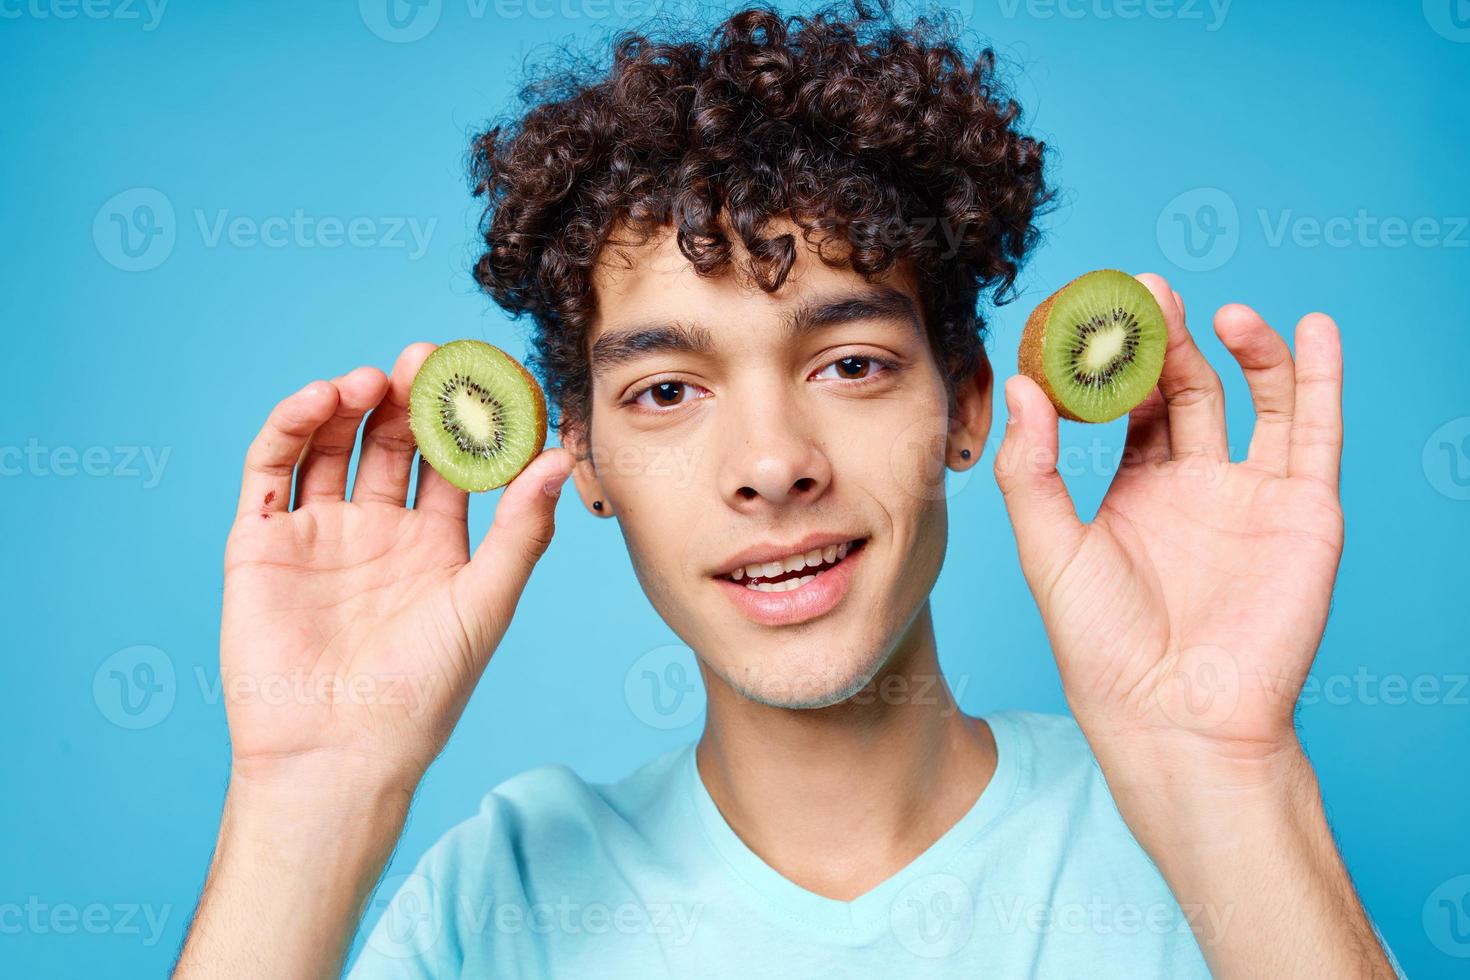 Cheerful guy blue t-shirts kiwi in the hands of vegetarianism fruits photo